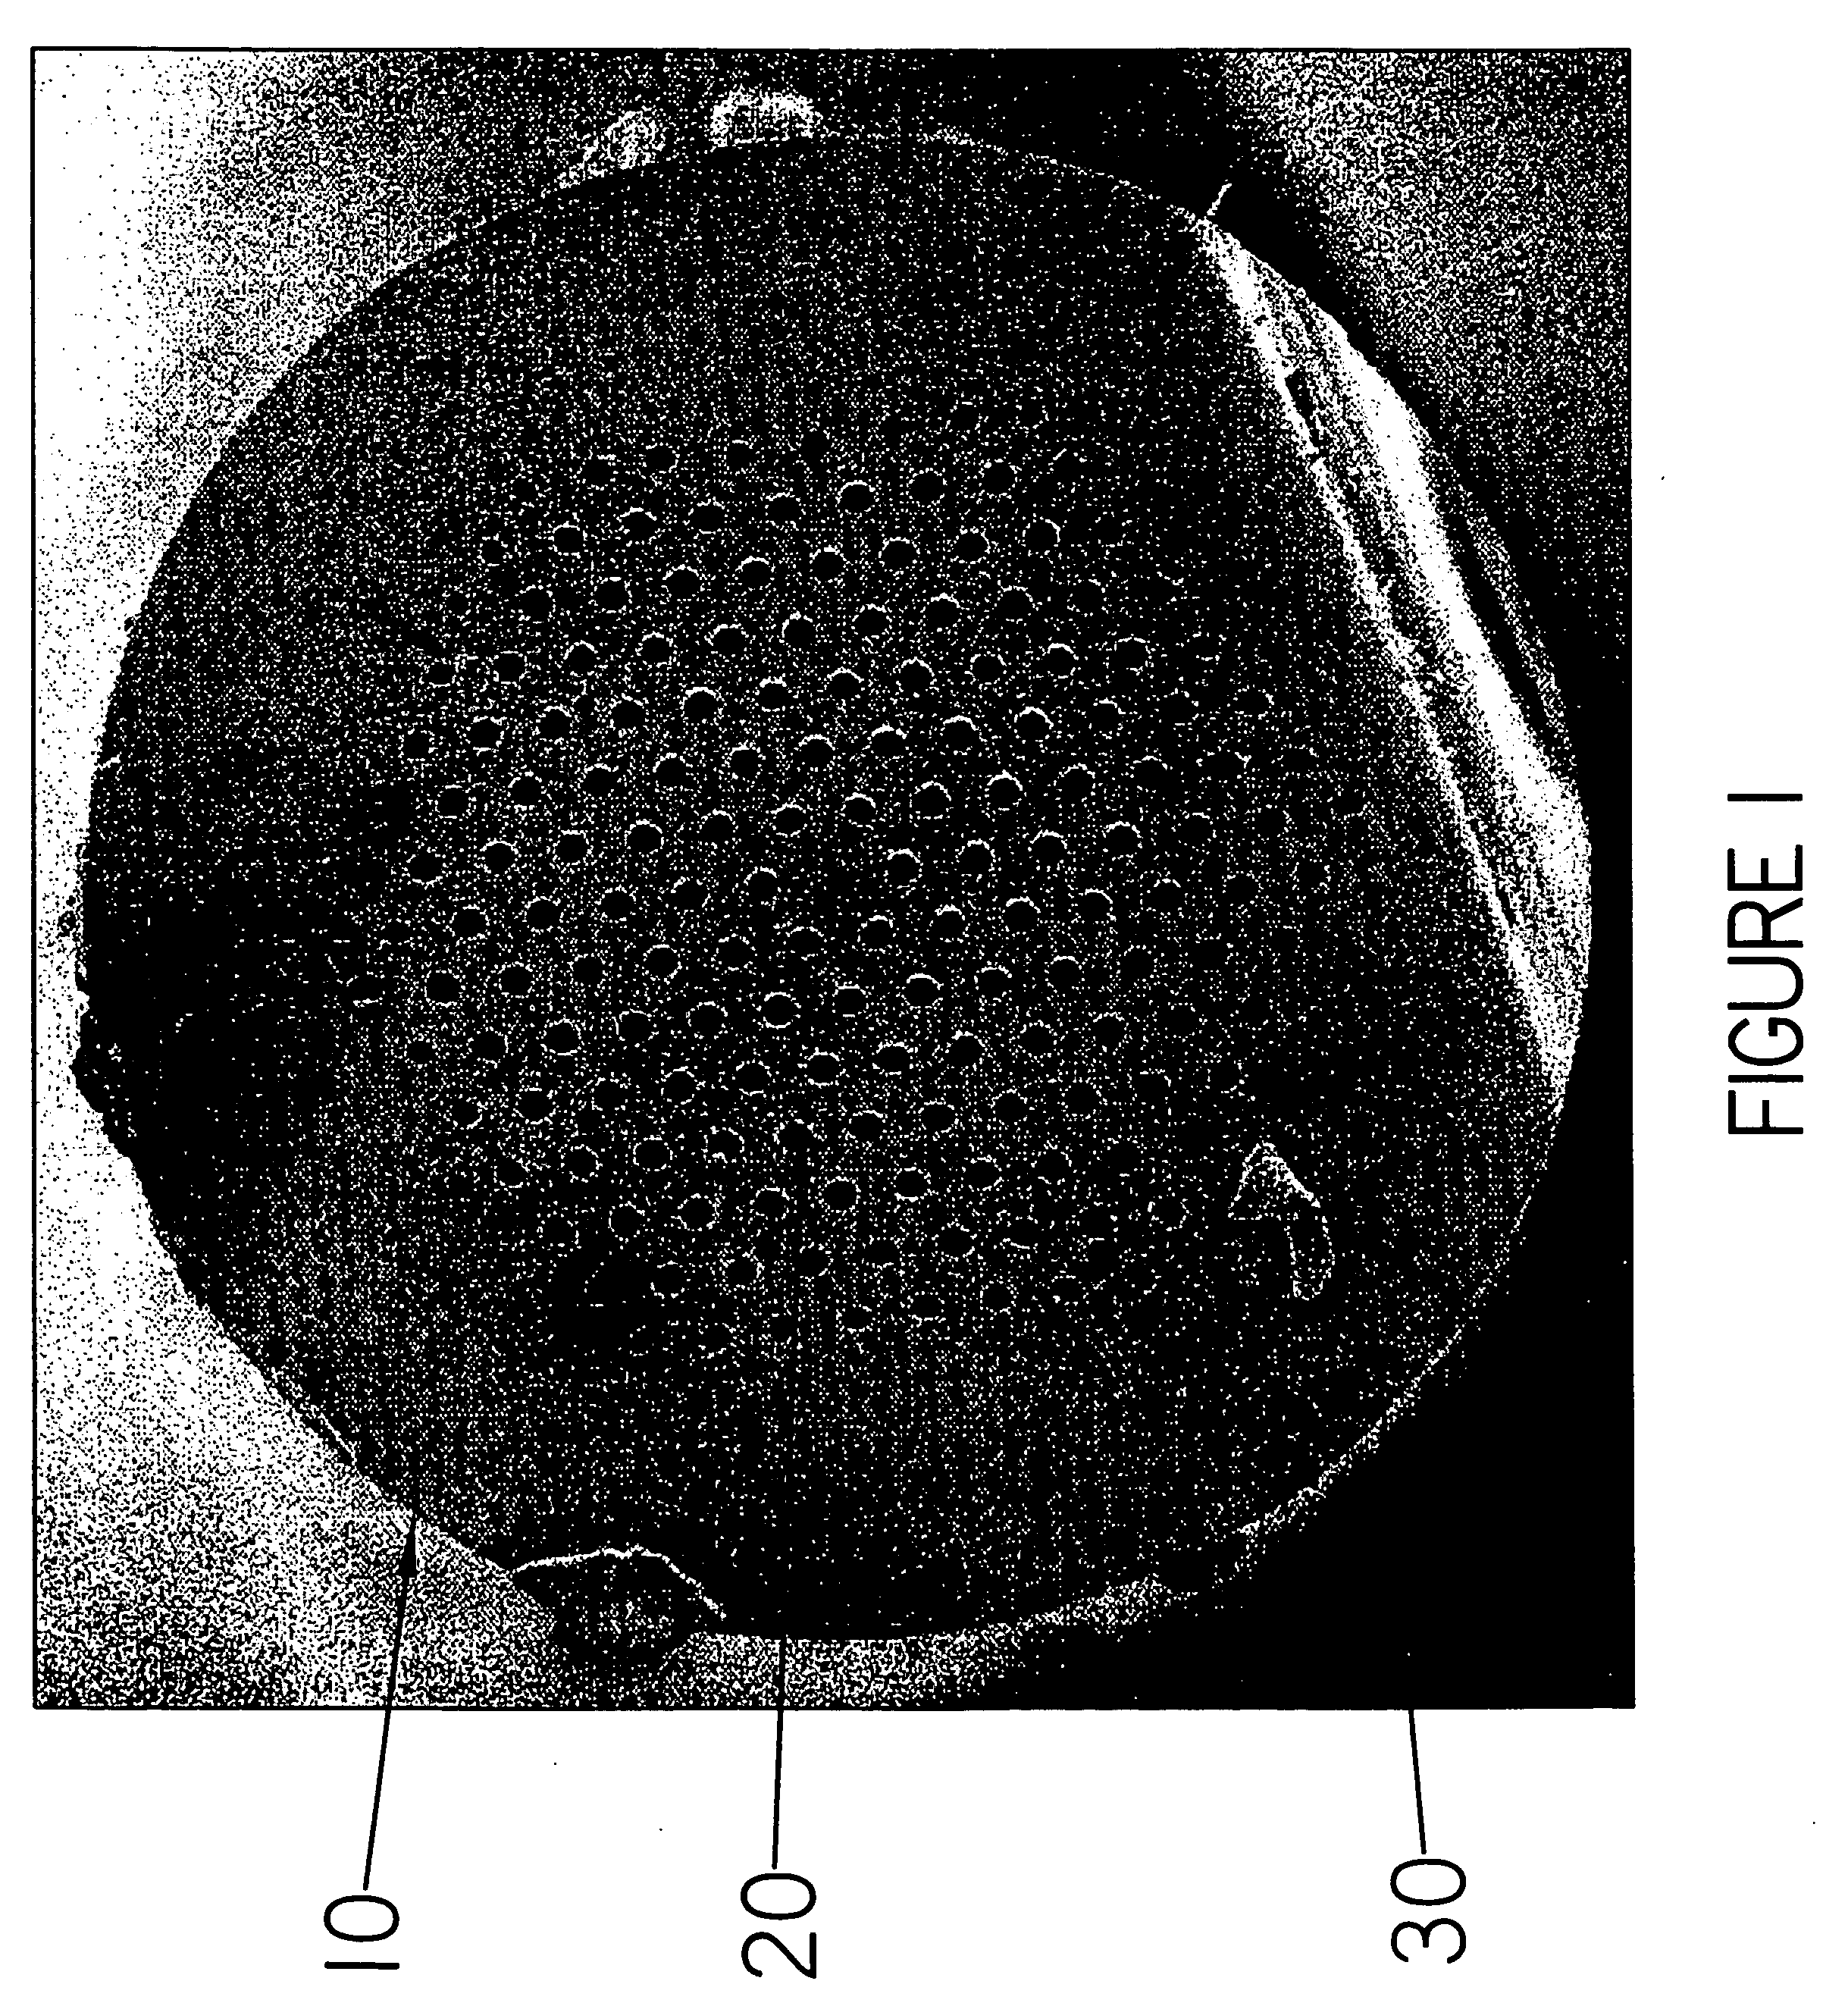 Method of synthesis and delivery of complex pharmaceuticals, chemical substances and polymers through the process of electrospraying, electrospinning or extrusion utilizing holey fibers